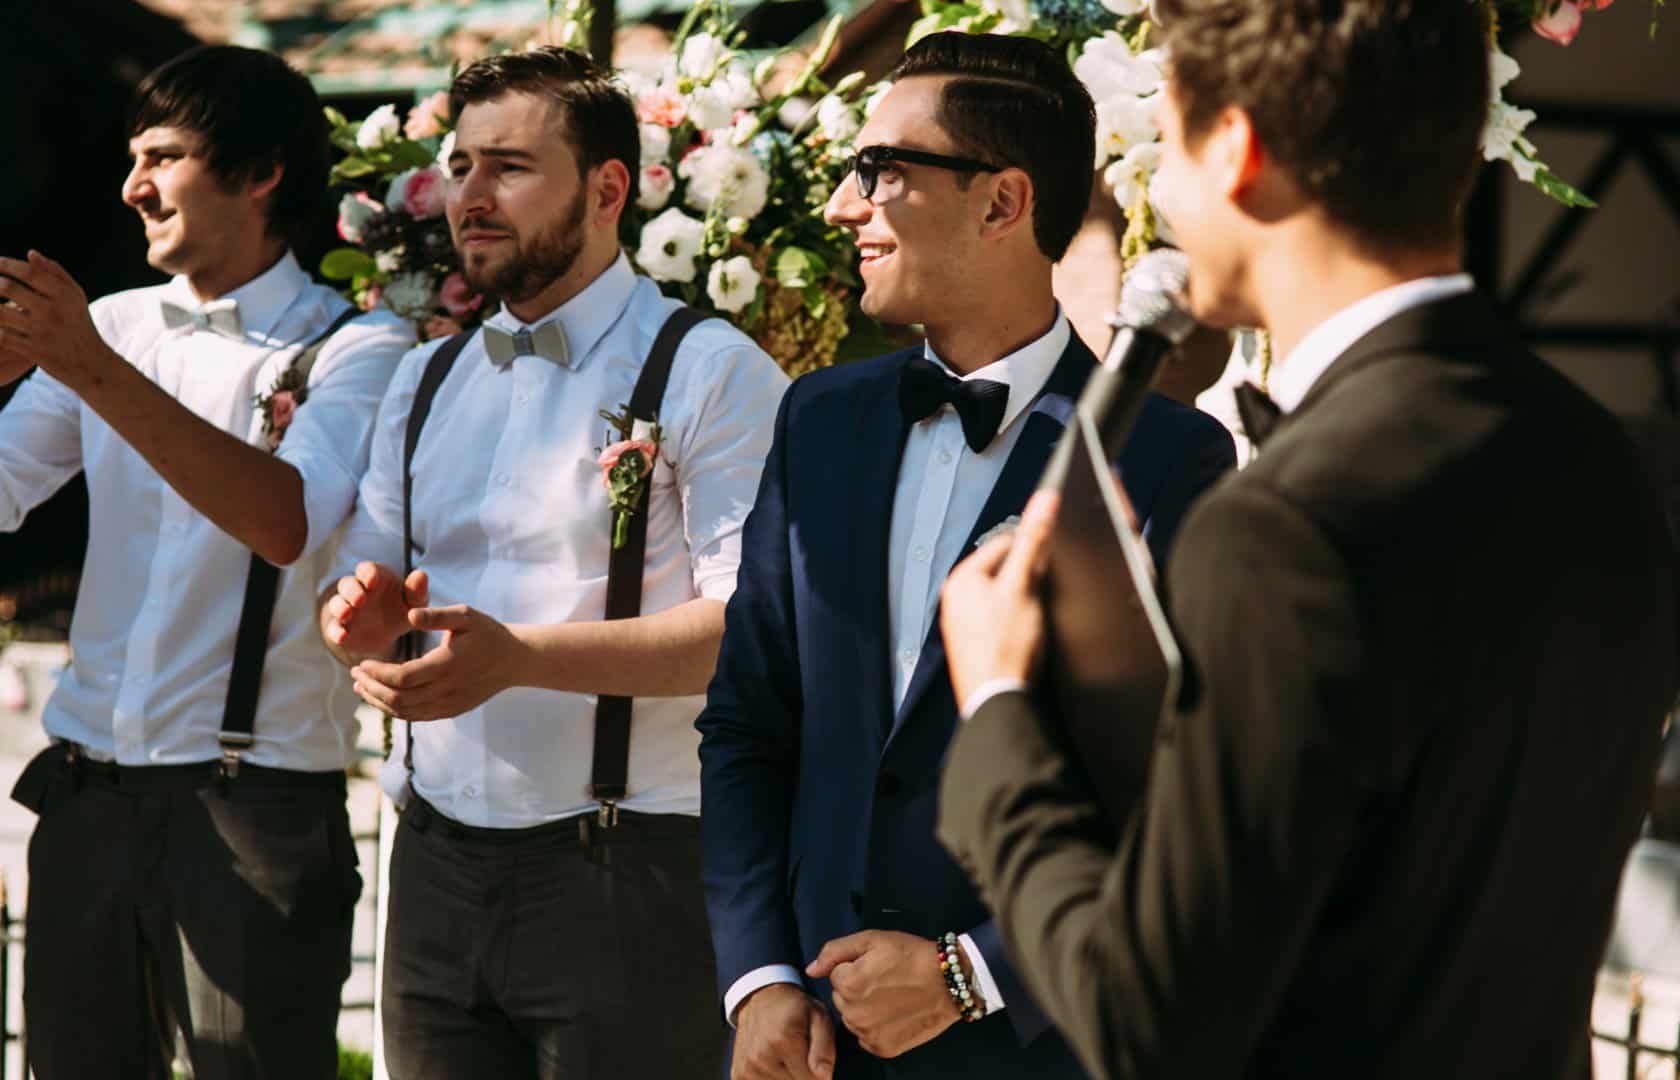 Best Man Duties: Don't Steal Bride! Do These Things Instead 75